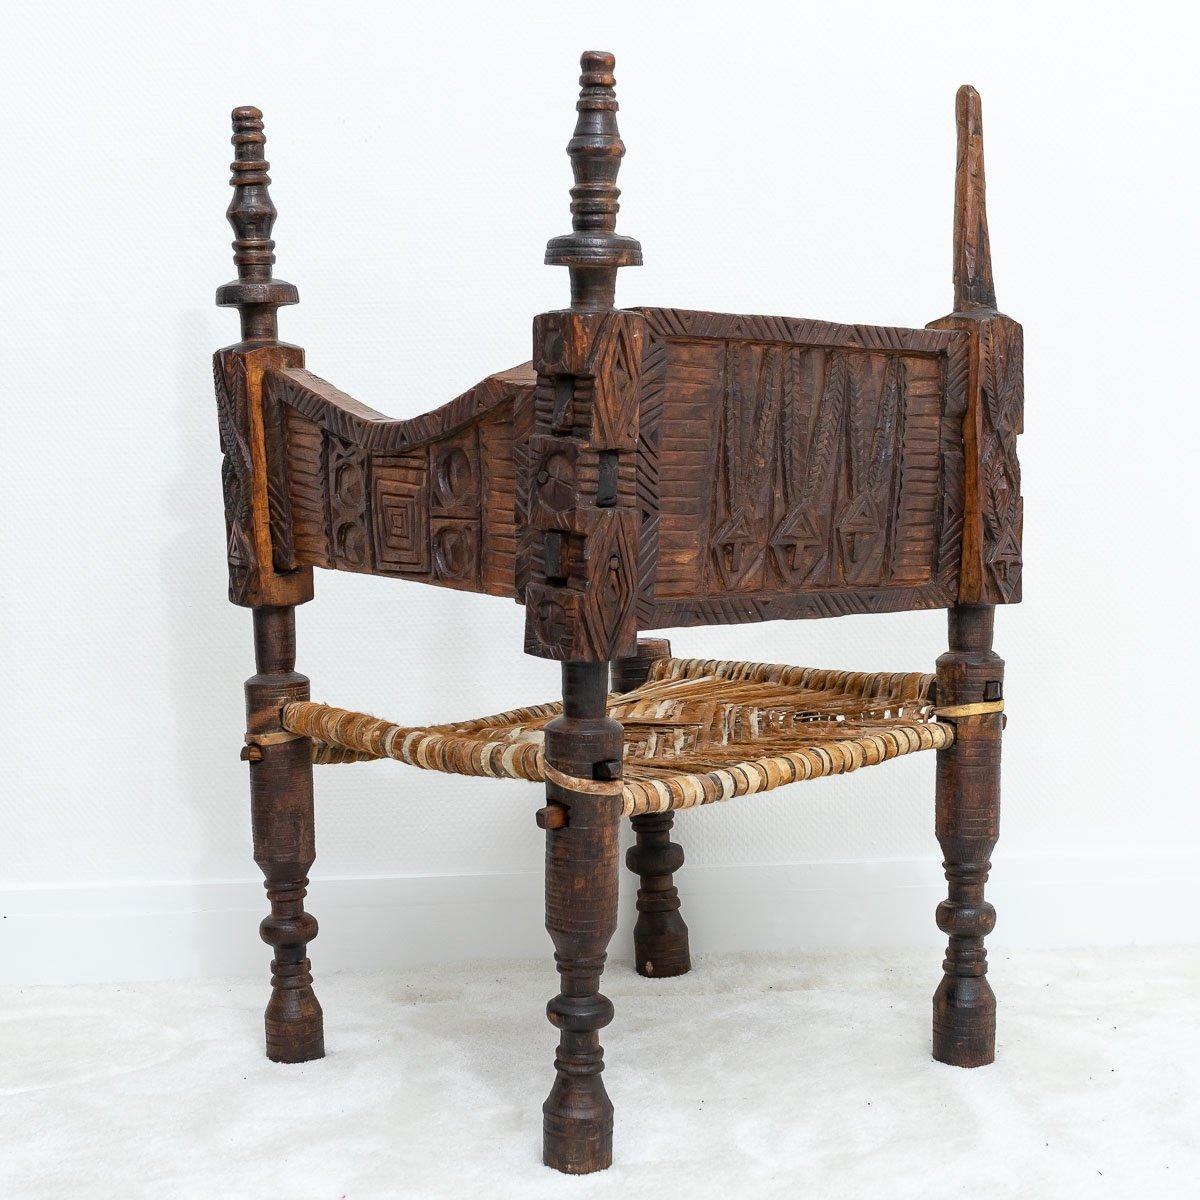 Wood Corner Or Corner Chairs And Footrest From Nuristan Afghanistan/pakistan - XIXth For Sale